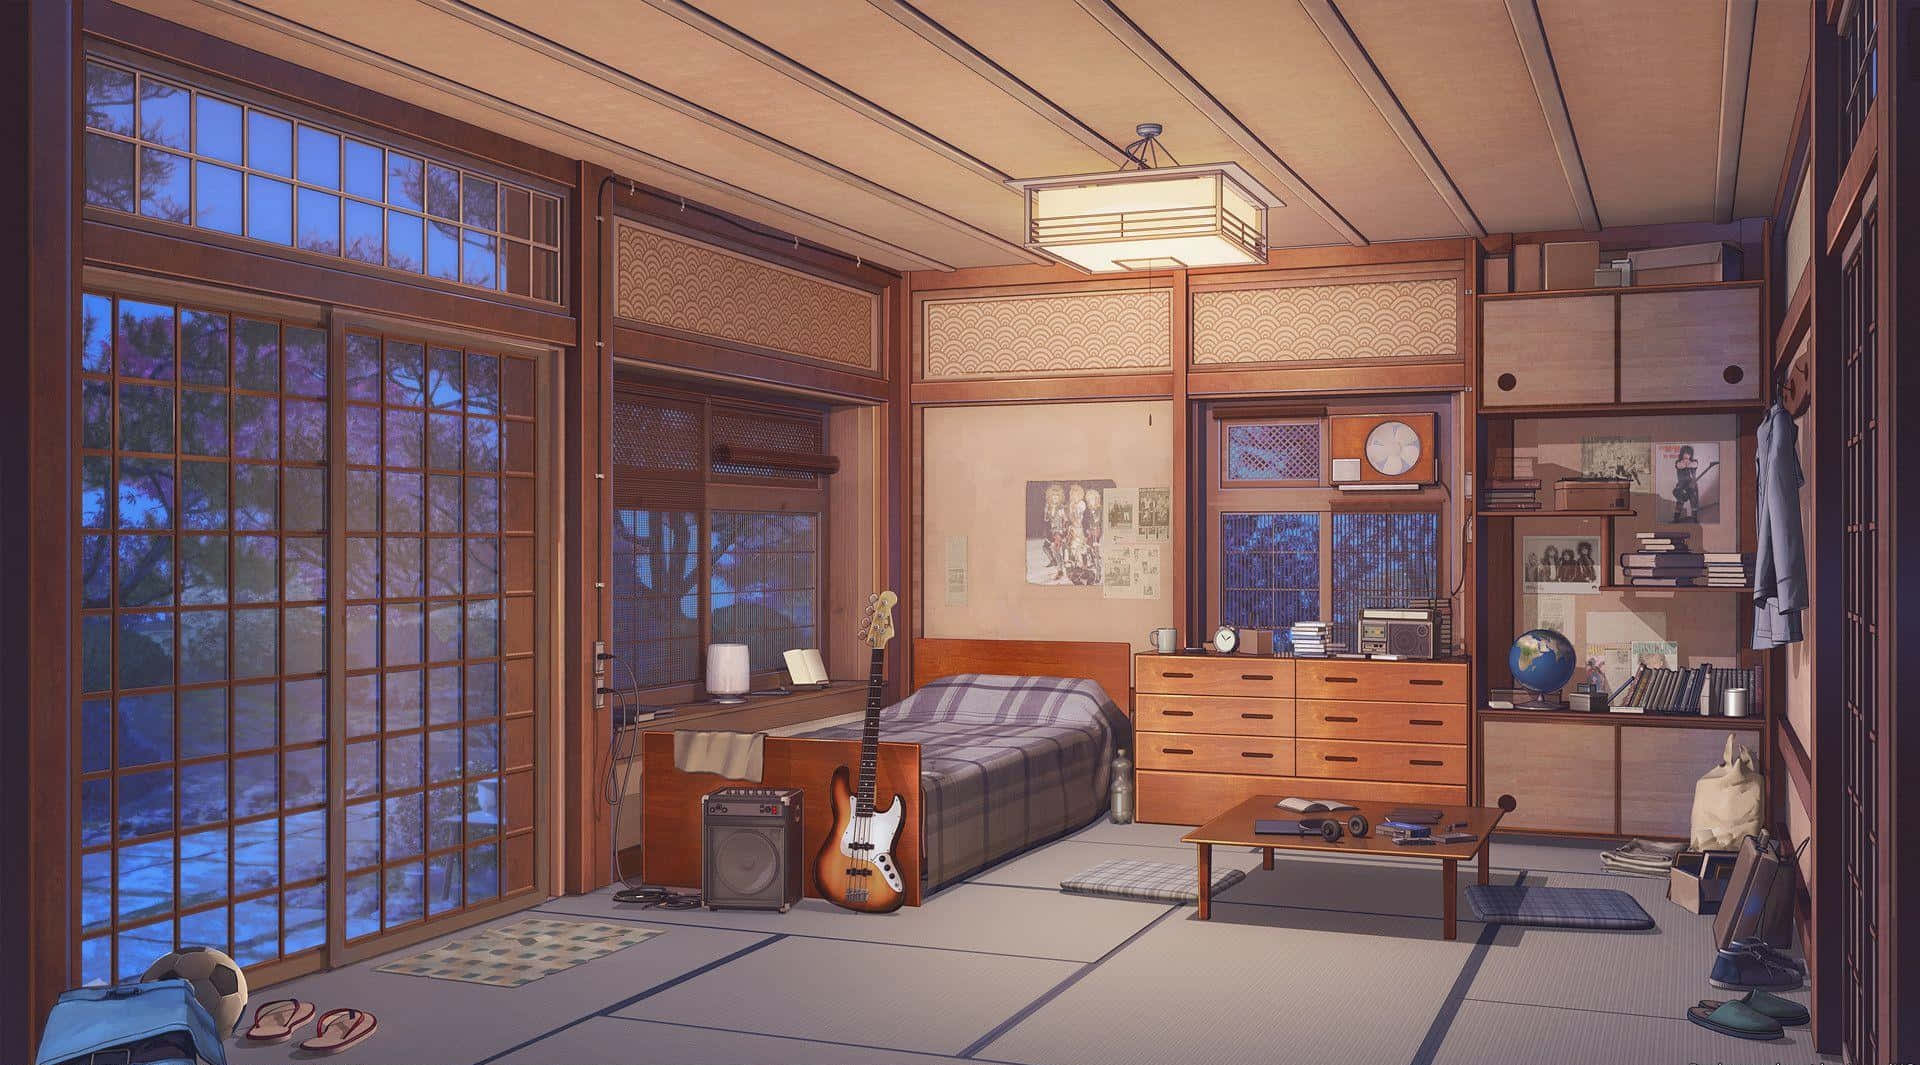 Making yourself comfortable in the world of animation with cozy anime. Wallpaper